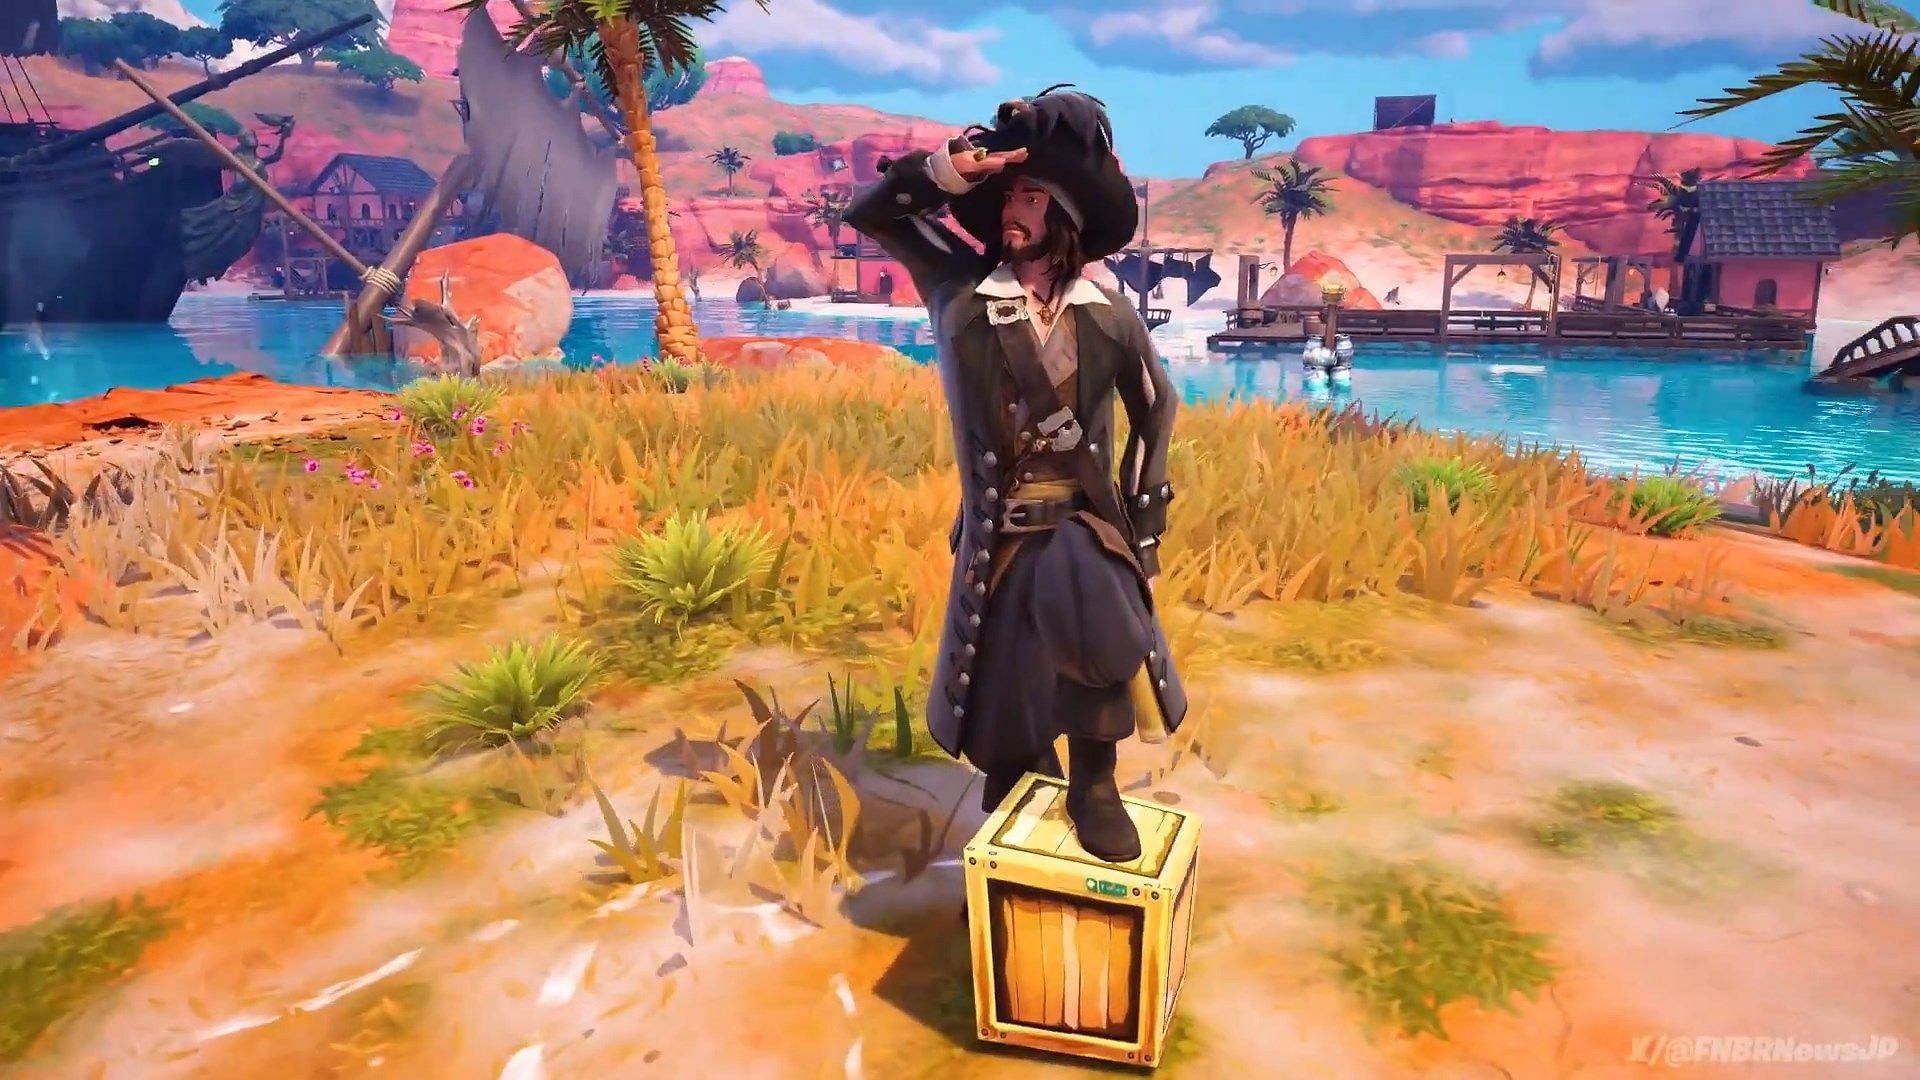 Fortnite Pirates of the Caribbean collaboration (Image via Epic Games)